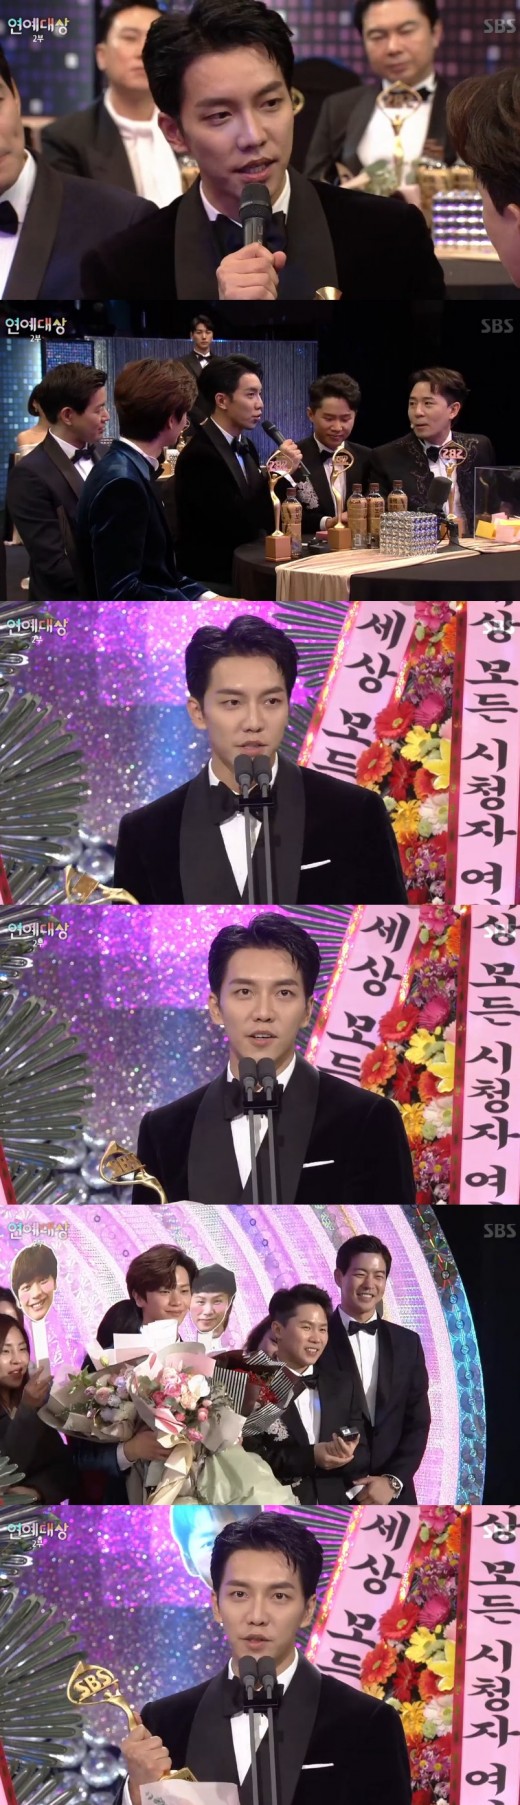 Lee Seung-gi has stood tallest in 2018, the biggest star to shine in the SBS entertainment industry.Lee Seung-gi won the Grand Prize at the SBS Grand Prize 2018 ceremony on the 29th.This is a year after discharge.All The Butlers was Lee Seung-gis first return to the military, with Yun and Yook Sungjae Yang Se-hyeong joining the team to form a solid lineup and stand out as a strong player in Sundays entertainment.Lee Seung-gi was honored with the Grand Prize of 2018 Entertainment.Before the announcement of the award, Lee Seung-gi said, I came to enjoy today. Grand prize is not greedy, but heavenly.Even after the awards announcement, Lee Seung-gi was in tears as if he couldnt believe it.Lee Seung-gi has won the Grand Prize in 2011 with 1 night and 2 days, but this is the first time for the single awards as team awards.Lee Seung-gi said, I know that it is not a prize received by my ability.There are many excellent seniors such as Yoo Jae-seok, Shin Dong-yeop, and Kang Ho-dong.And the masters who appeared in All The Butlers, it is a meaningful award that contains the philosophy of life and the life that they have lived. Lee Seung-gi also said, For me, weekend variety has a special meaning. I am a man of many incarnations.Good seniors The members of All The Butlers who love their juniors.Yook Sungjae, who won a wonderful colleague with Yun, who overcame the adolescence of entertainment, should not be without Yang Se-hyeong.Thank you very much, he said to his colleagues at All The Butlers.Finally, Lee Seung-gi said, When I first chose All The Butlers, why not go to La Strada, which is easy. I was nervous, too.But when I walked La Strada, I found something new.  In 2019, I am not afraid of challenge, and I will go to La Strada in Tooktuck, as many seniors did. Lee Seung-gi has stood tallest in a year across the world.